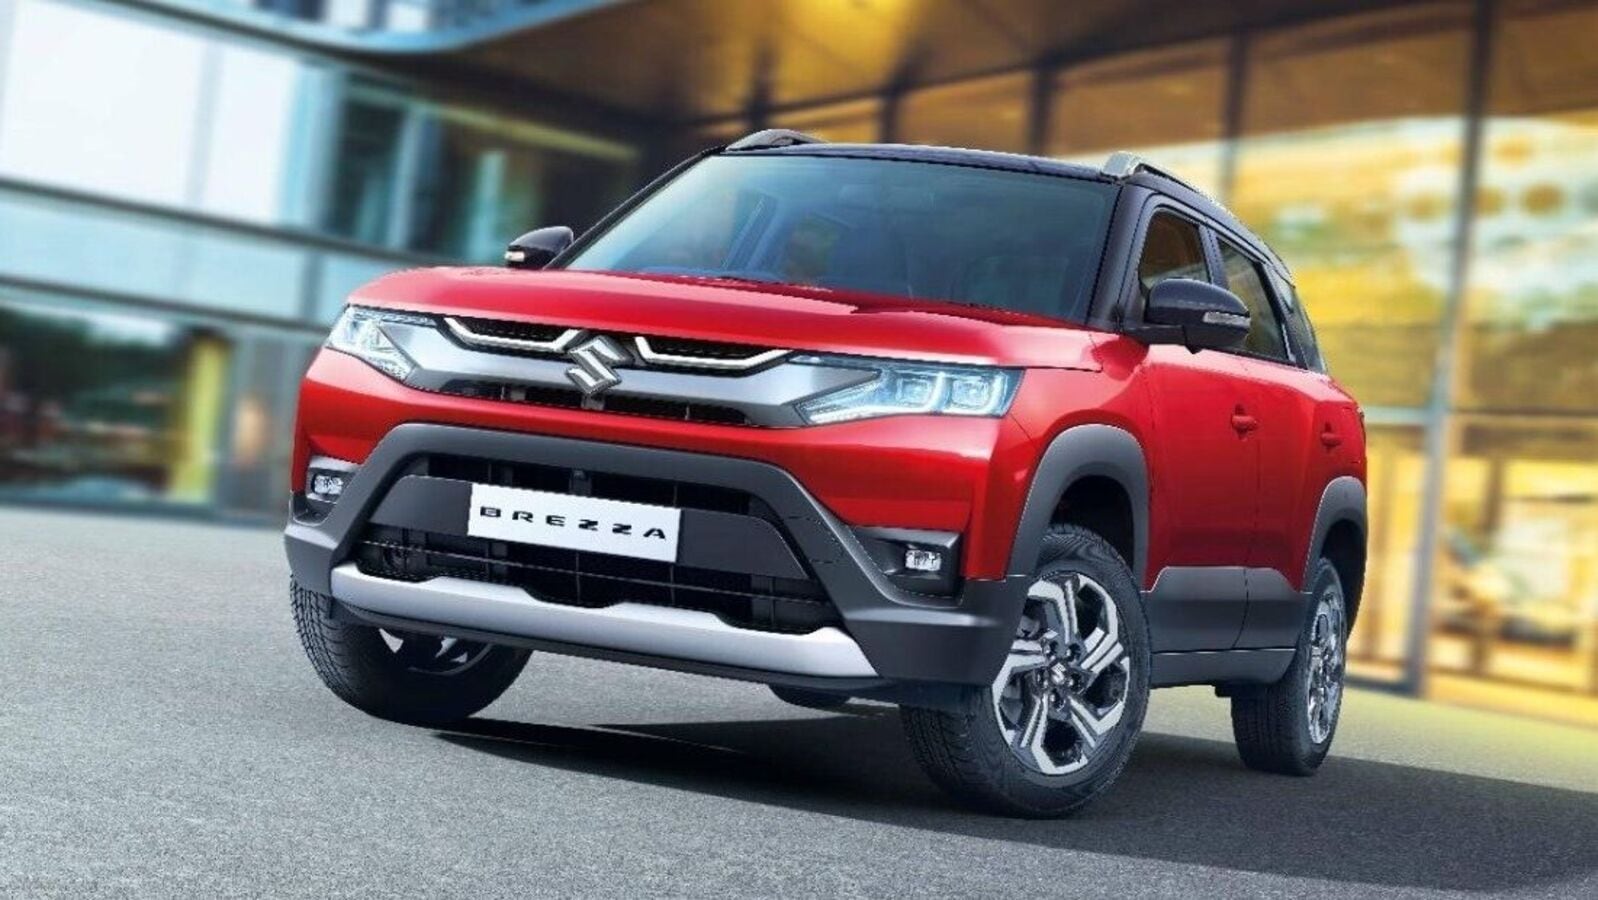 Maruti Brezza 2022 Price, Features, Variants, Colors and More HT Auto